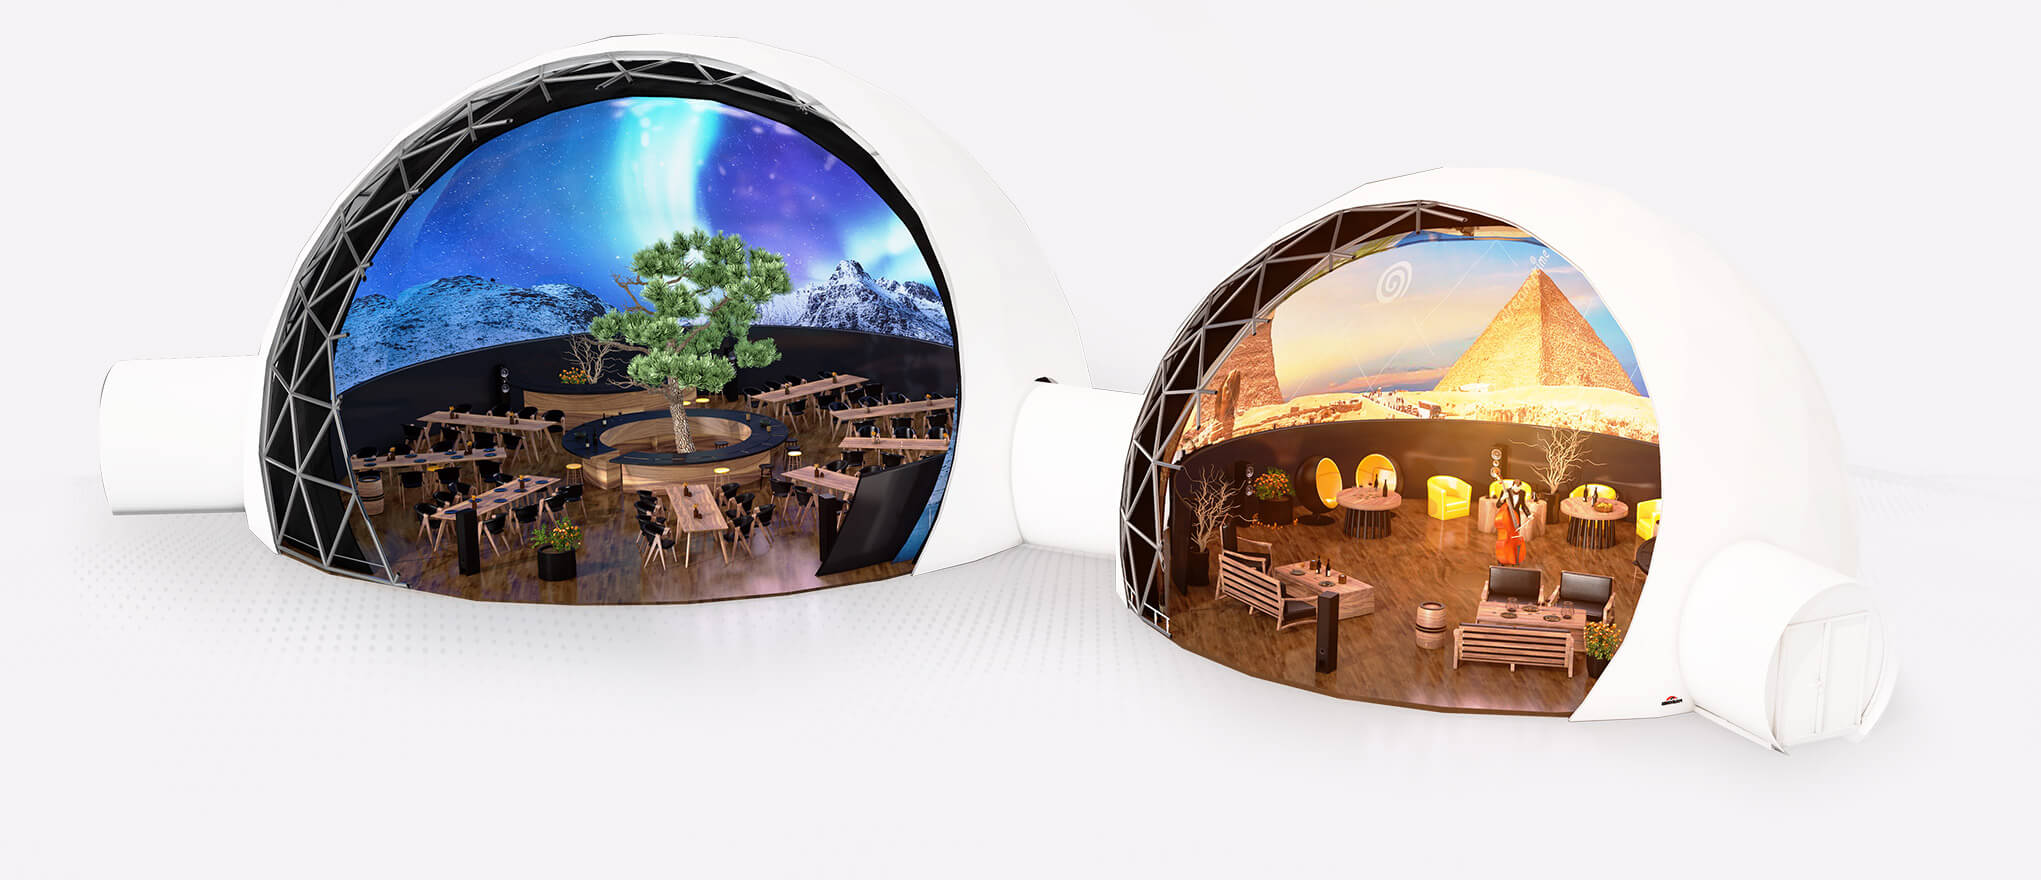 Two connected immersive domes for restaurant - multimedia 360 video solutions